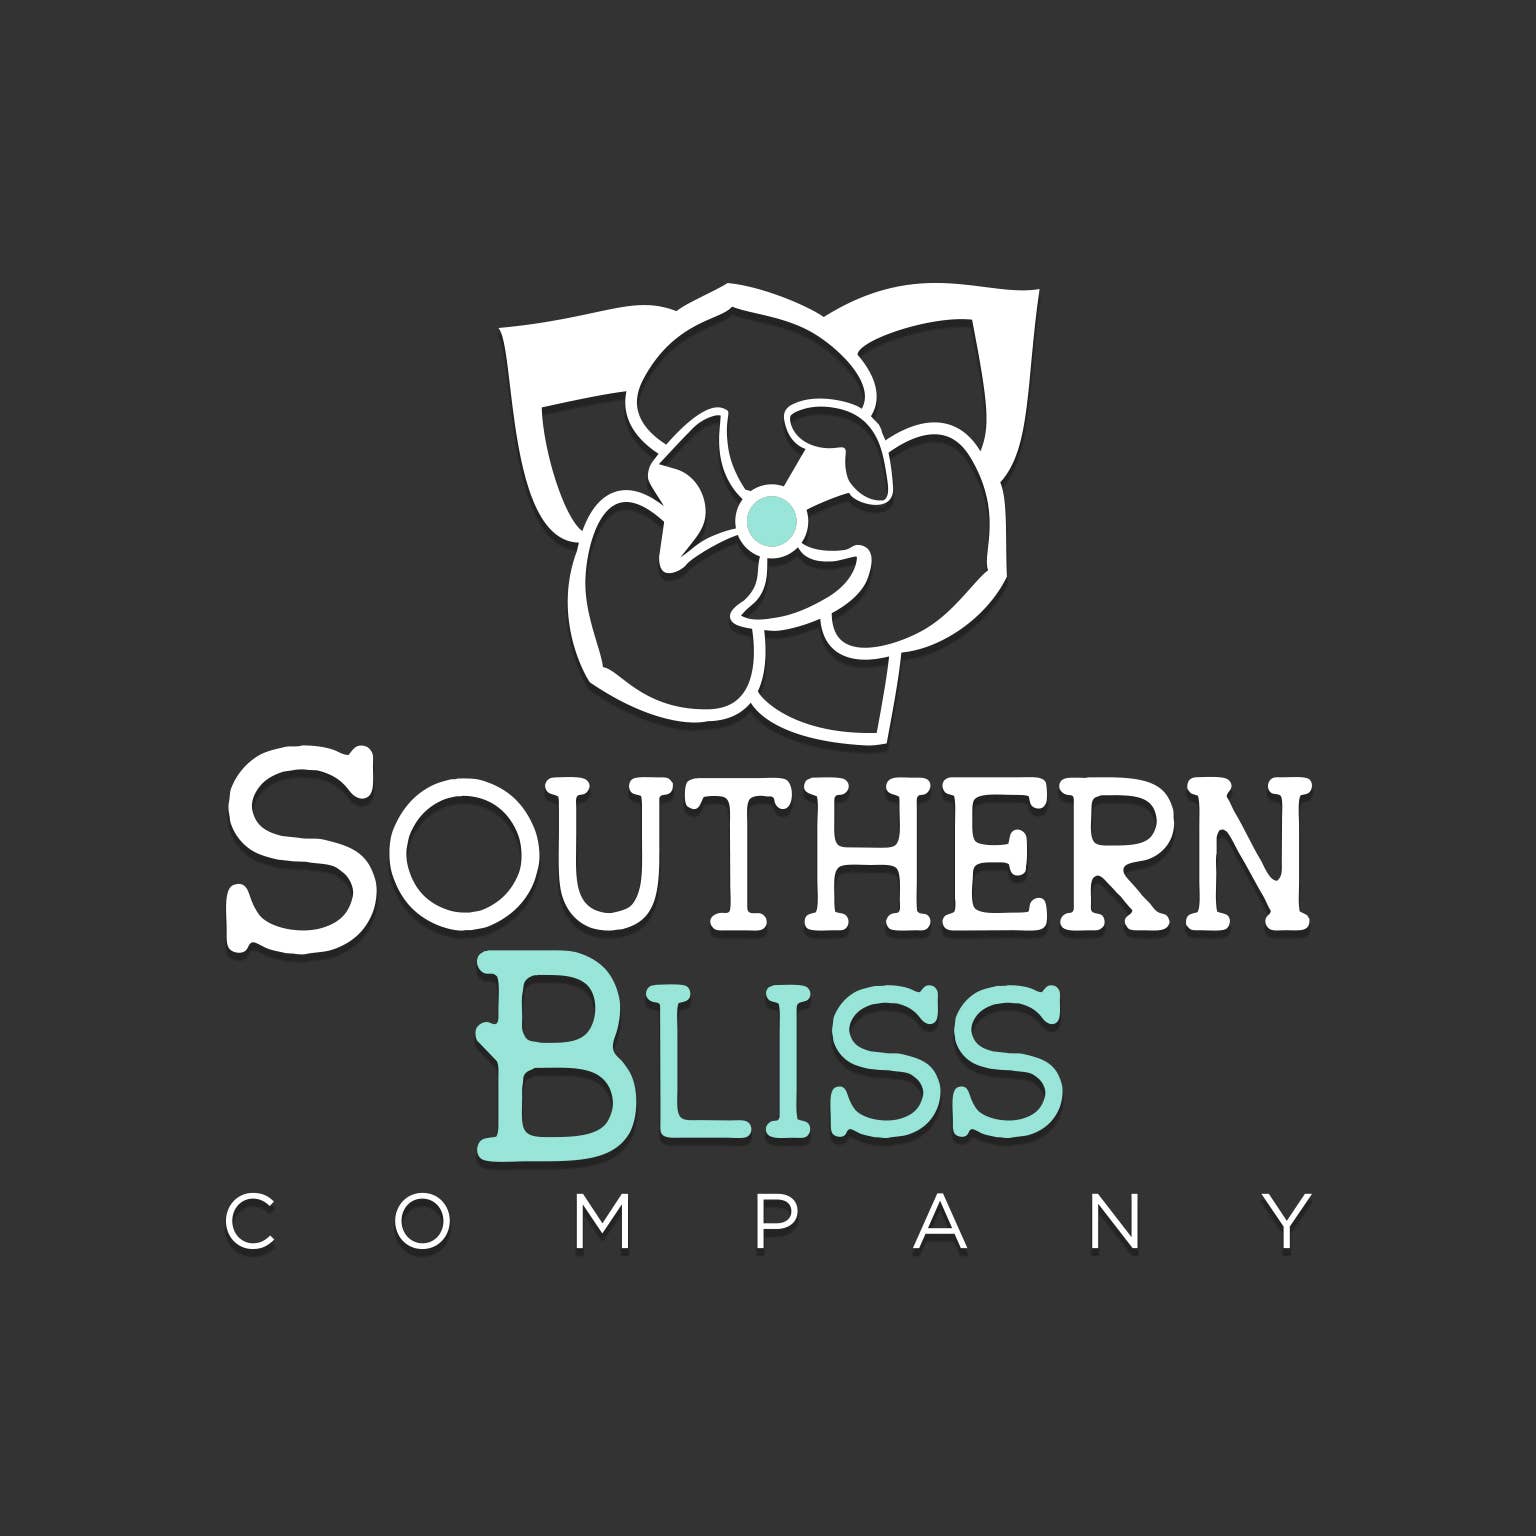 Southern Bliss Bomb Party - Follow this picture on how to set your customer  account! Please let me know if you need any help.